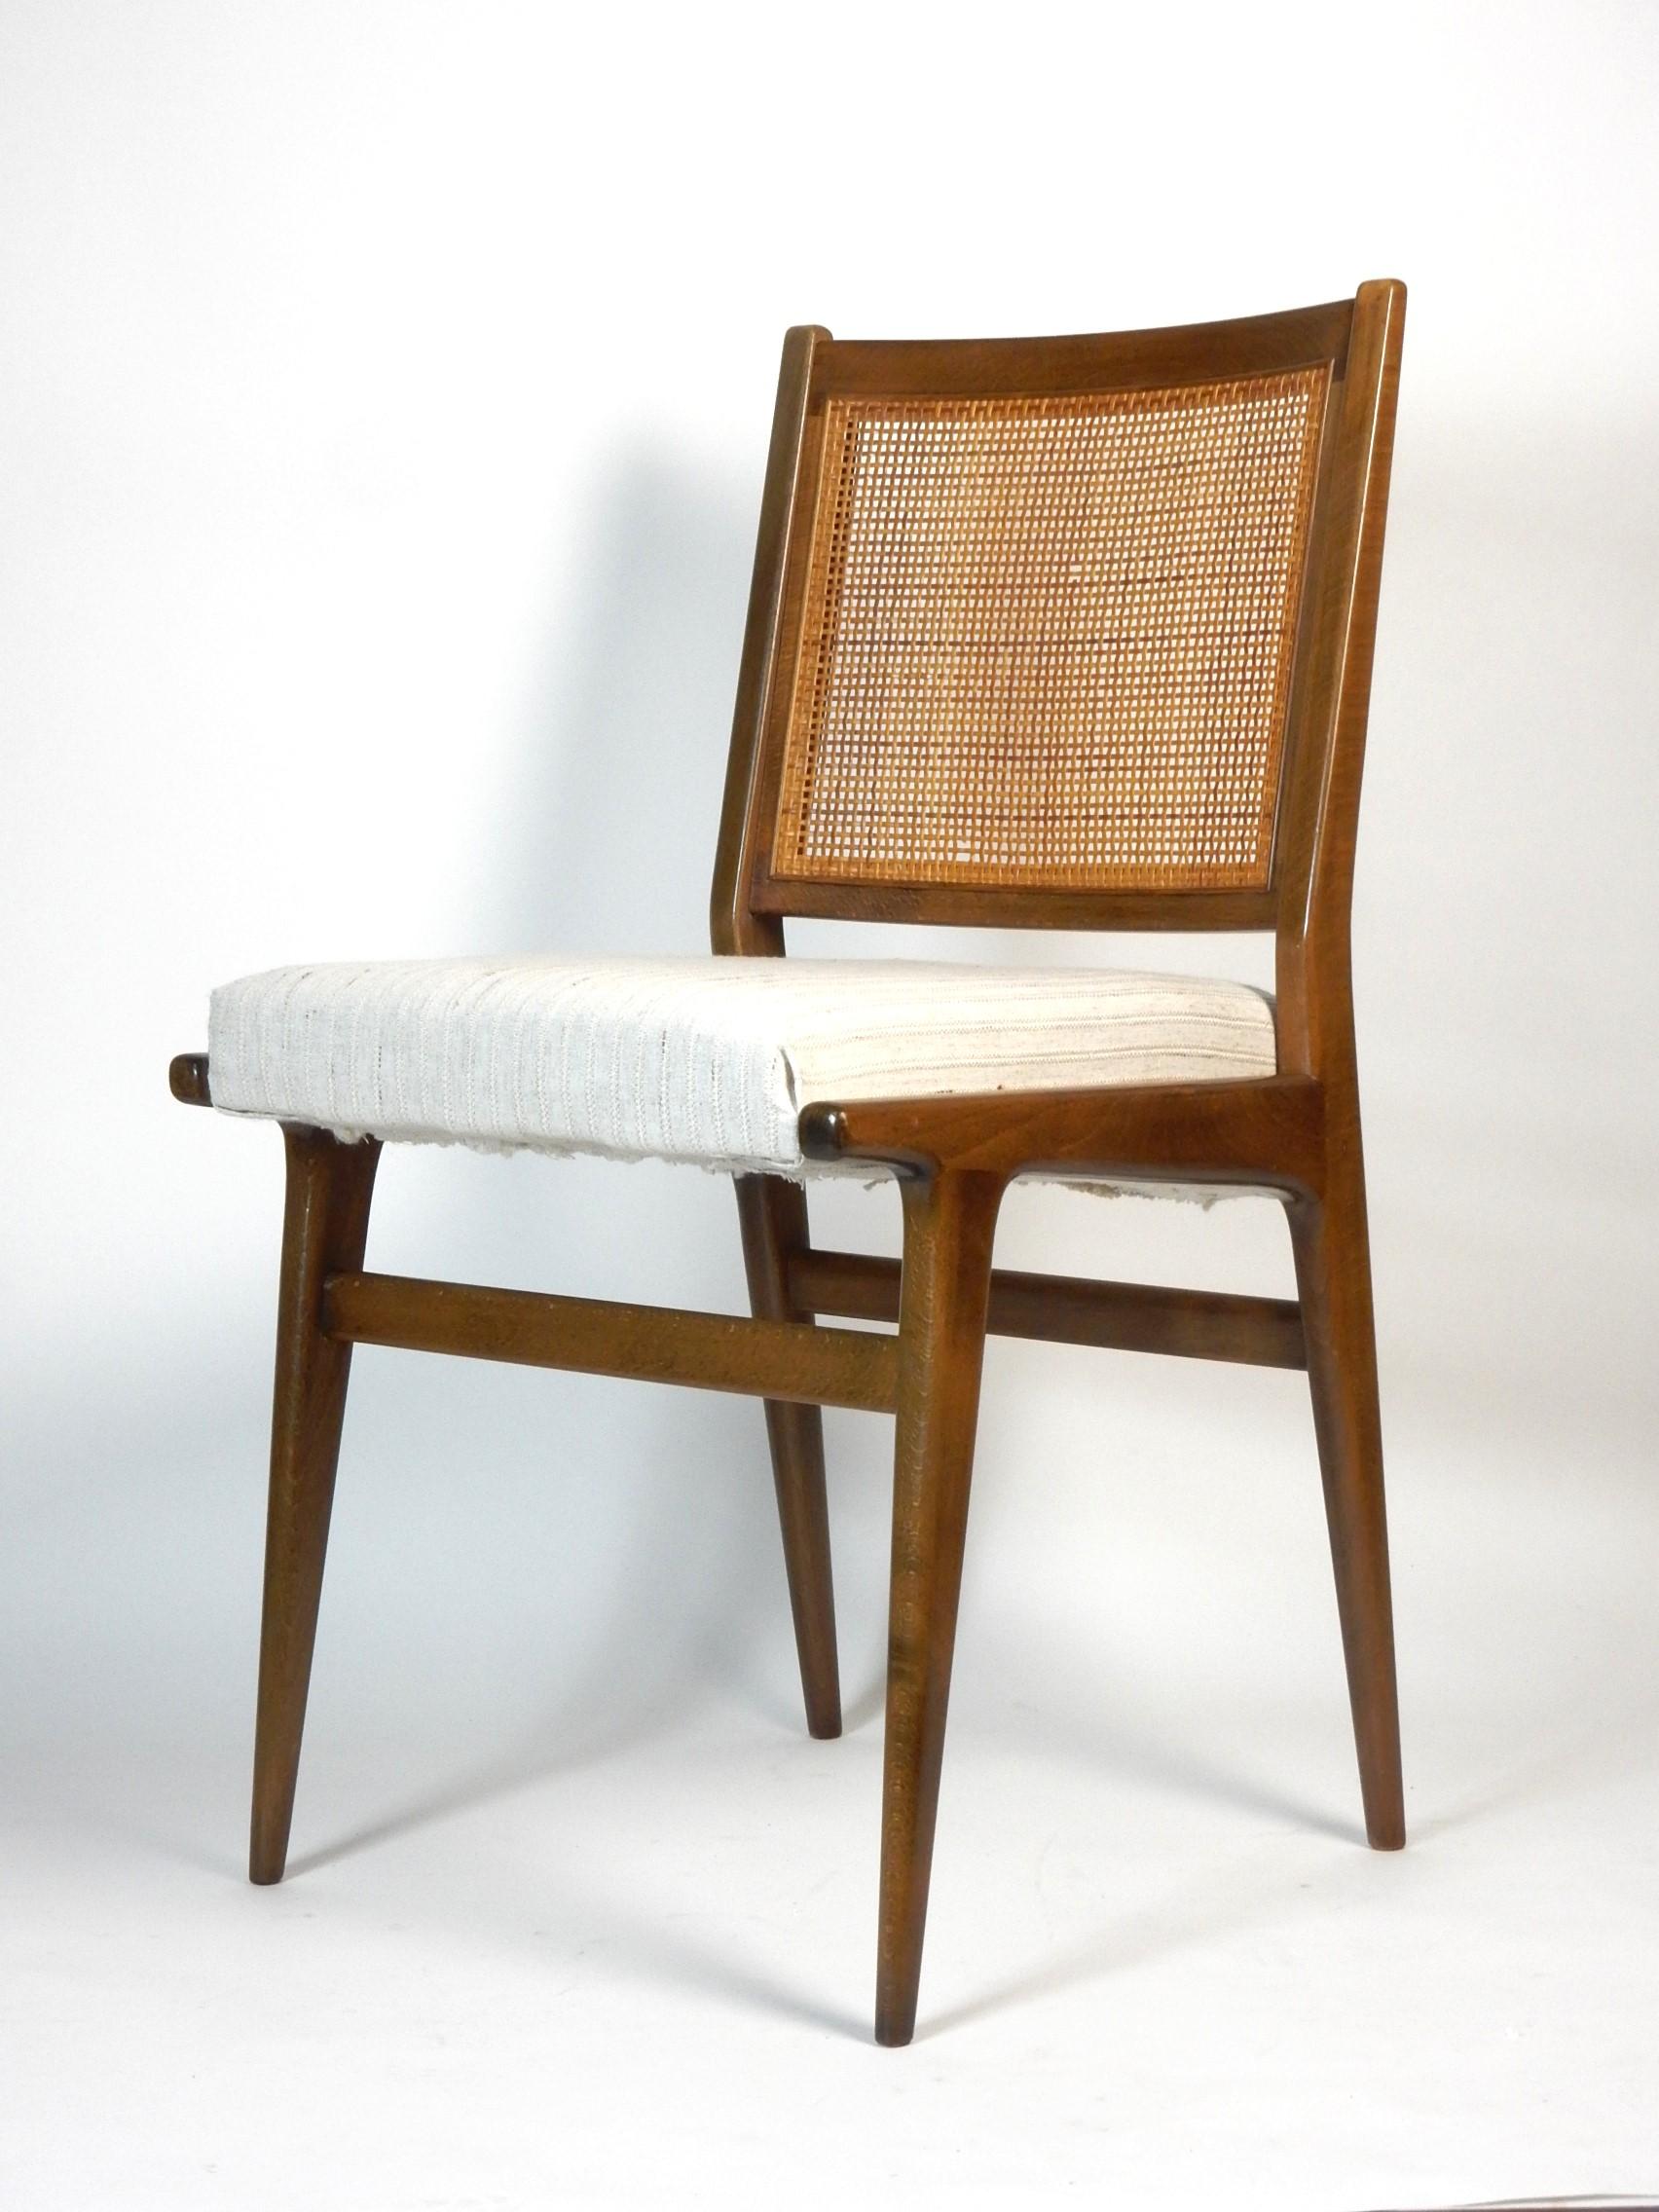 Beautiful pair of cane back dining chairs designed by Jens Rison for J.O. Carlssons Möbelindustri.
Completely original except for the seat covers. 
Well cared for as you can see in photos. 
A few small areas where the cane is chipped(pictured). Both